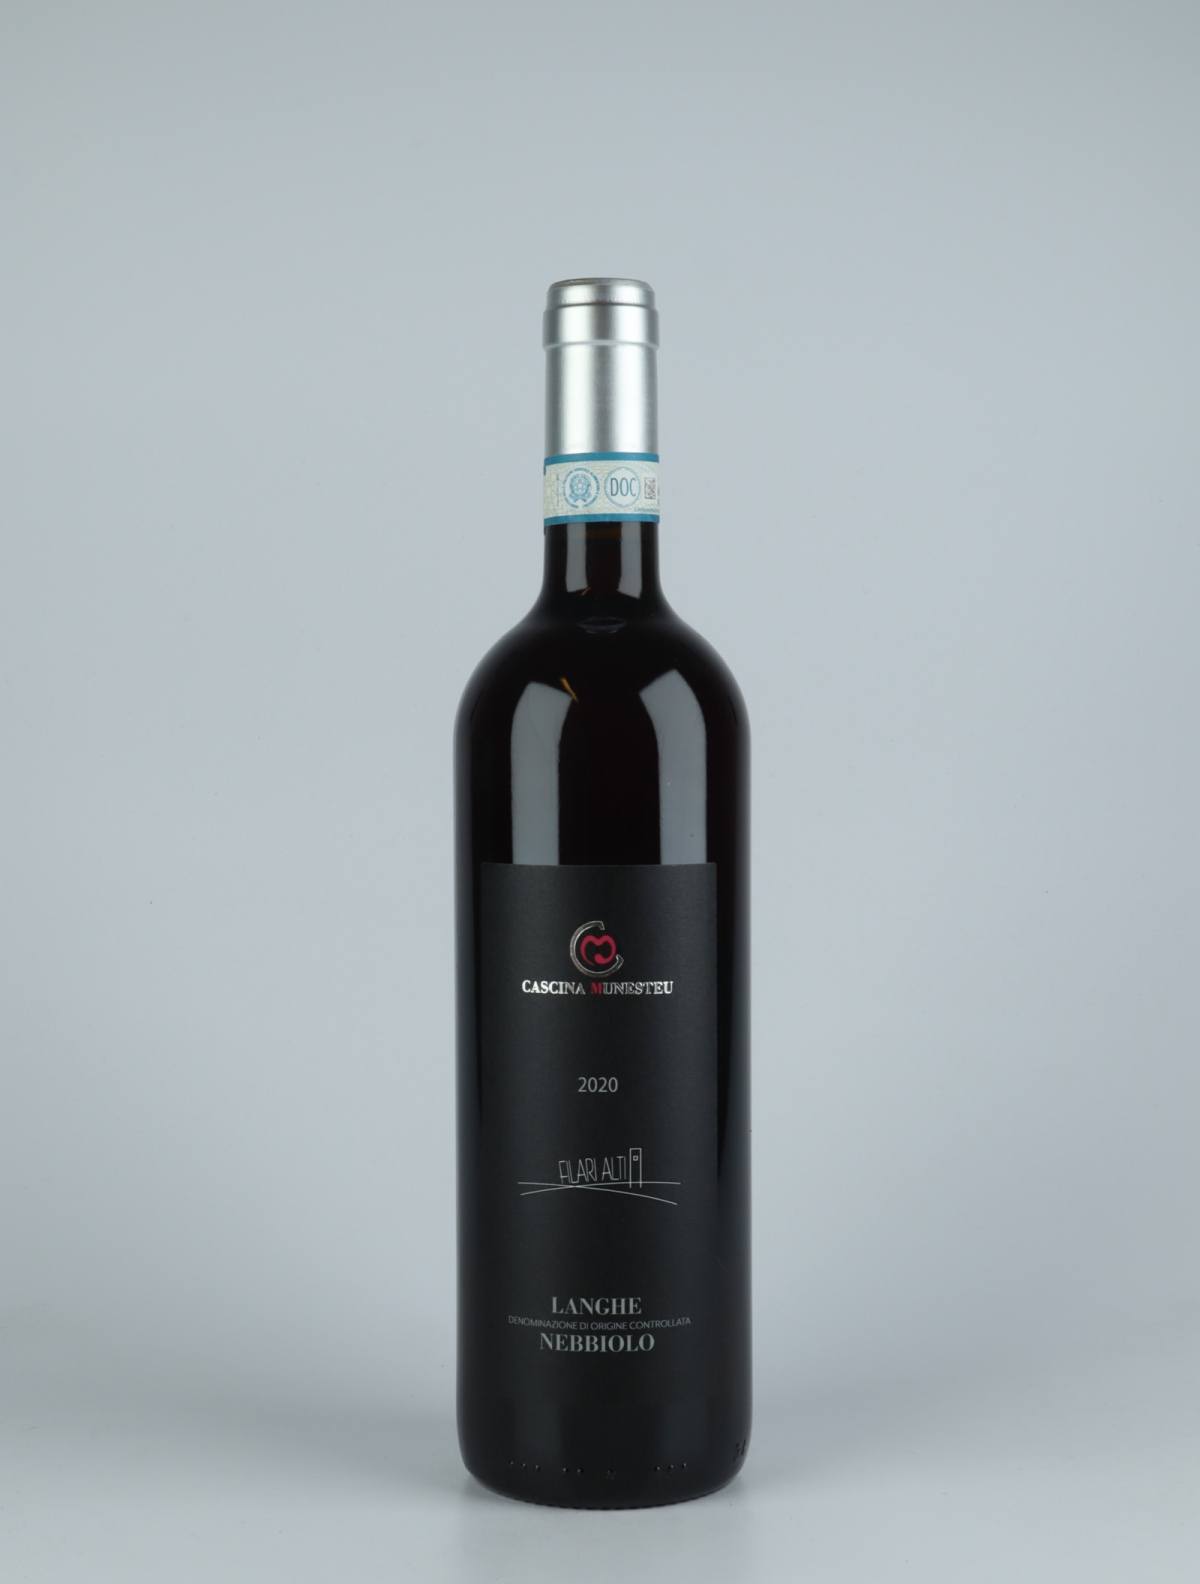 A bottle 2020 Langhe Nebbiolo - Filari Alti Red wine from Cascina Munesteu, Piedmont in Italy